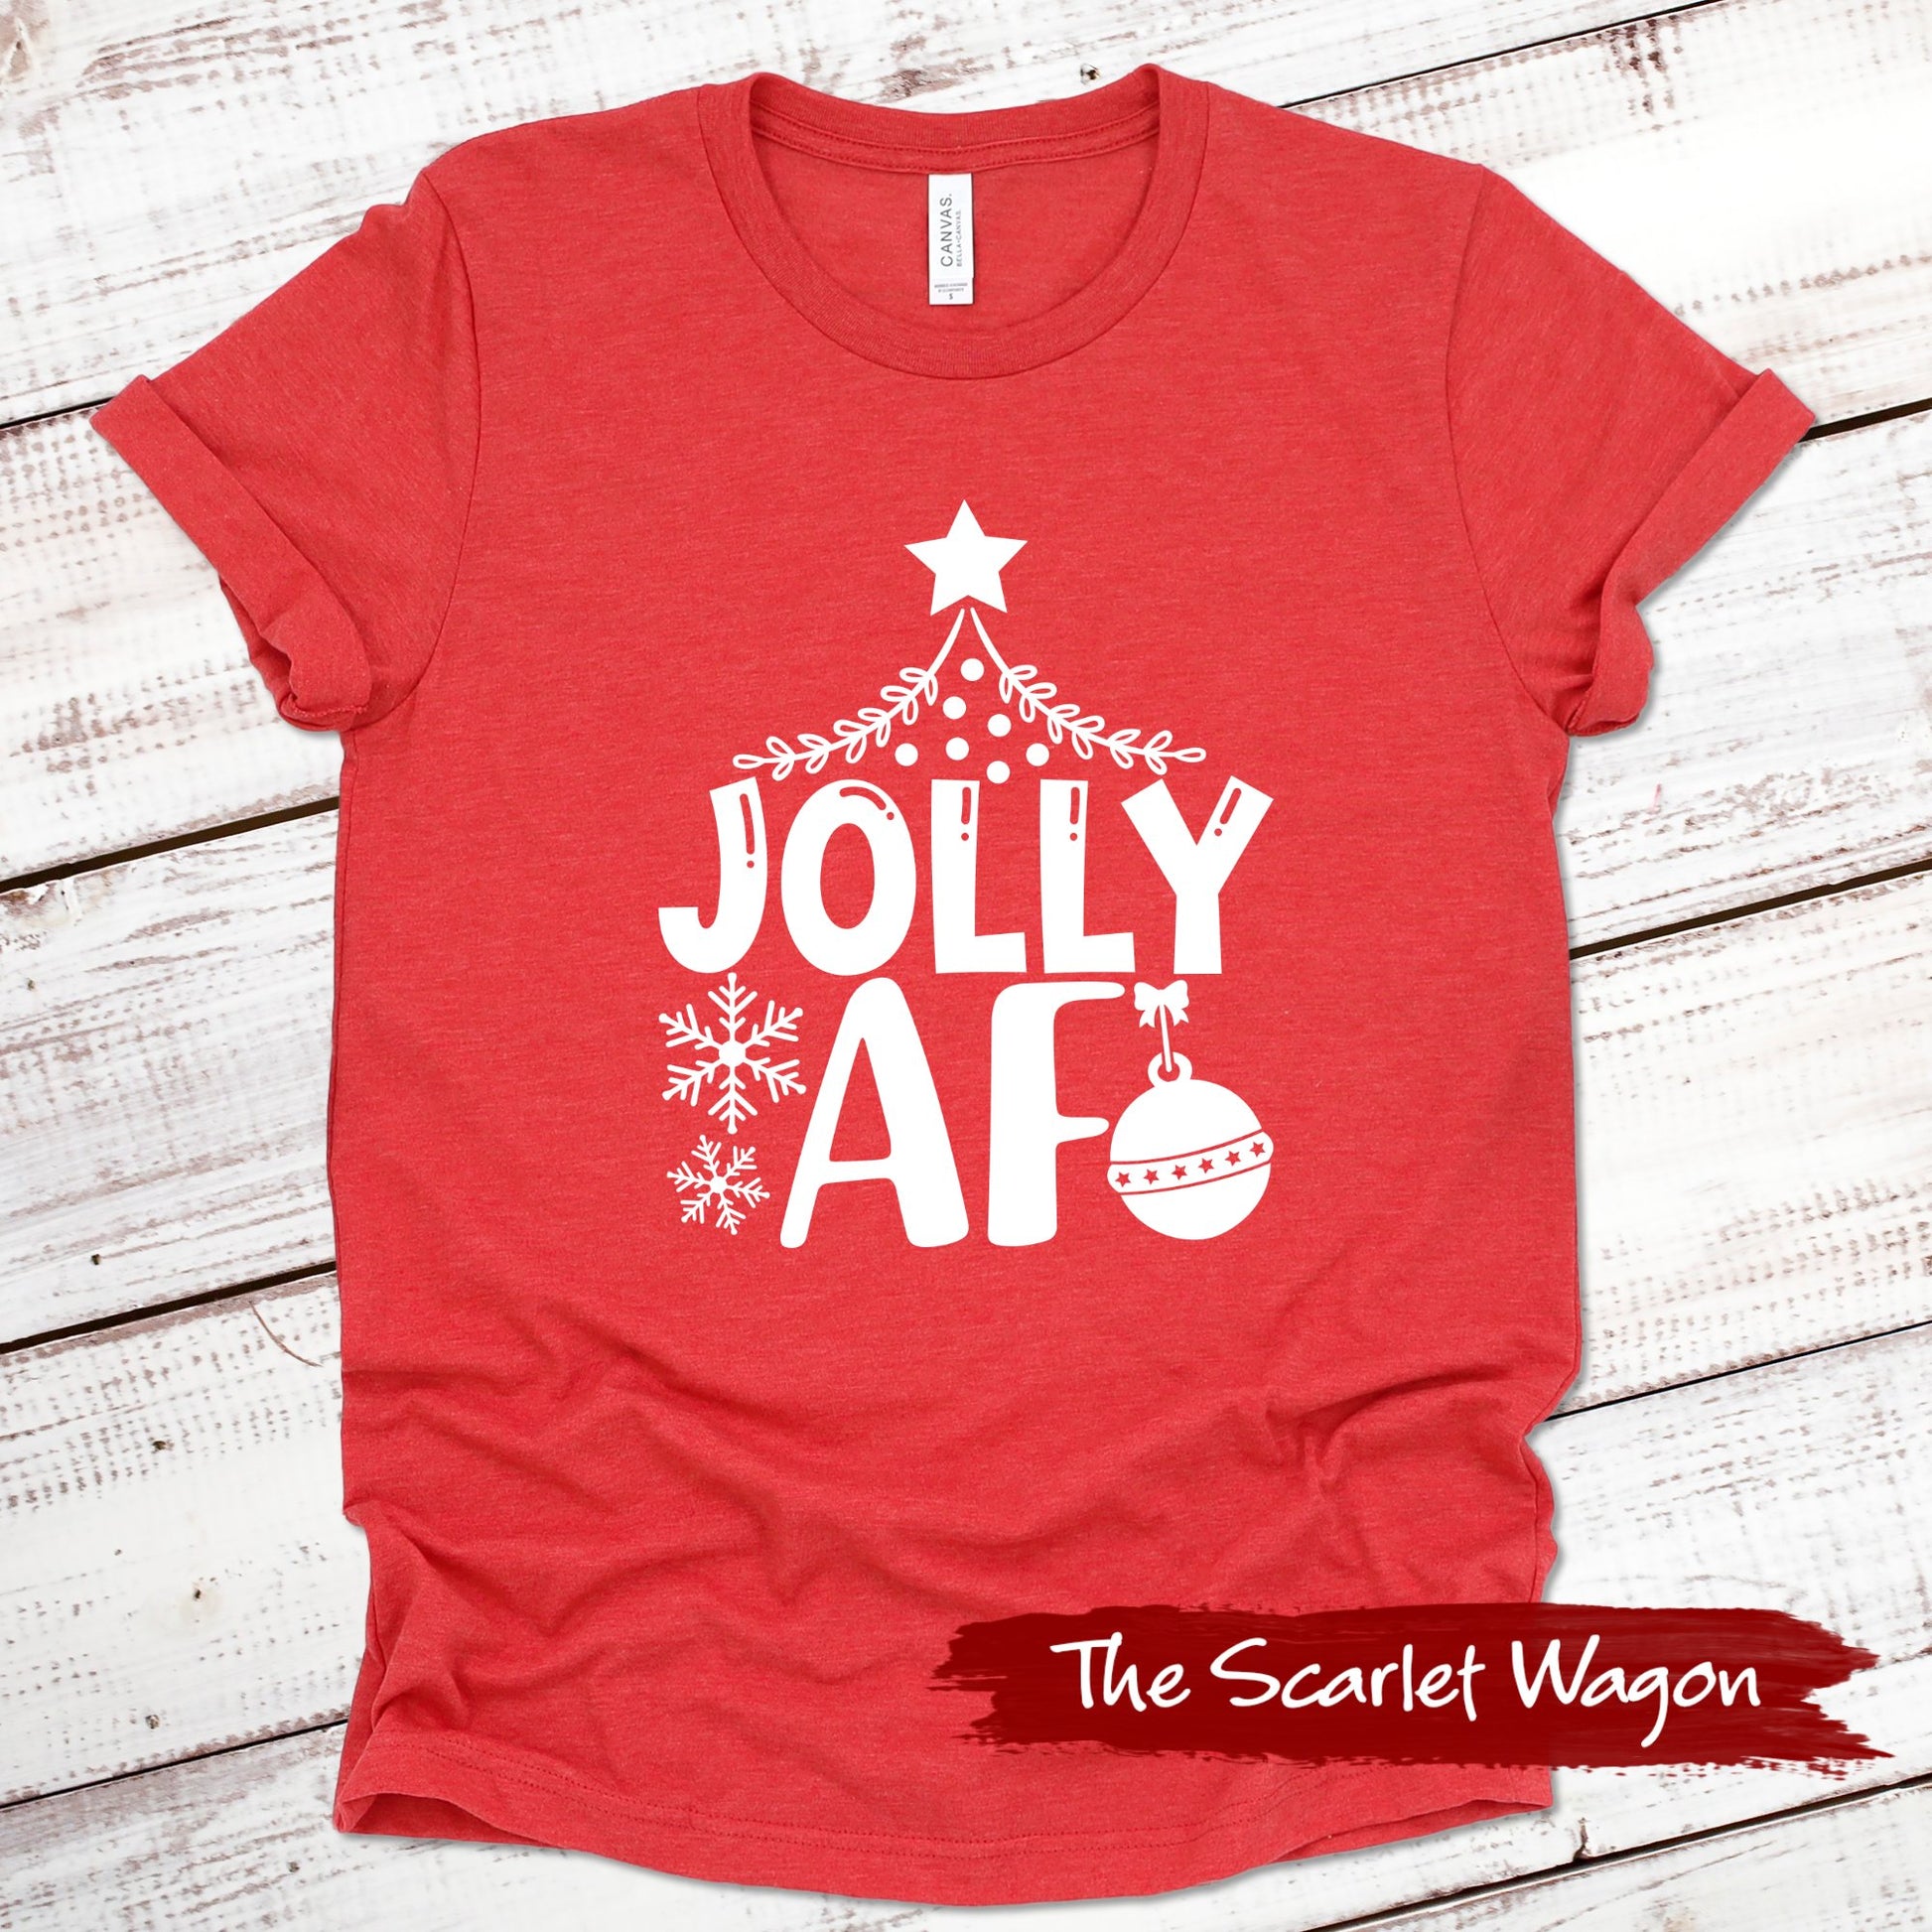 Jolly AF Christmas Shirt Scarlet Wagon Heather Red XS 